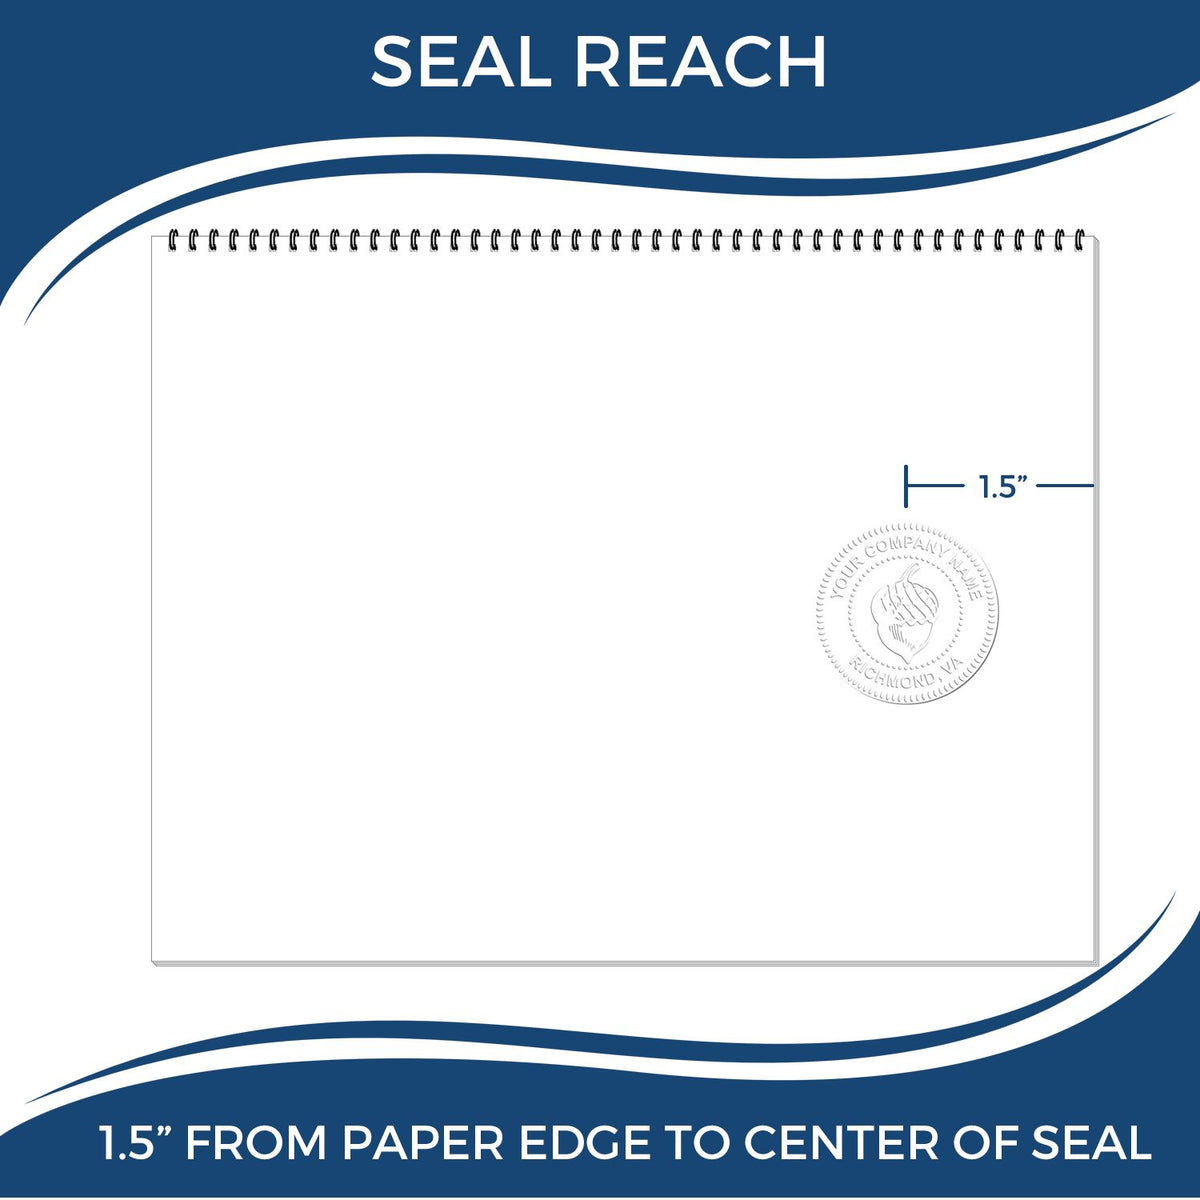 An infographic showing the seal reach which is represented by a ruler and a miniature seal image of the Soft Guam Professional Geologist Seal